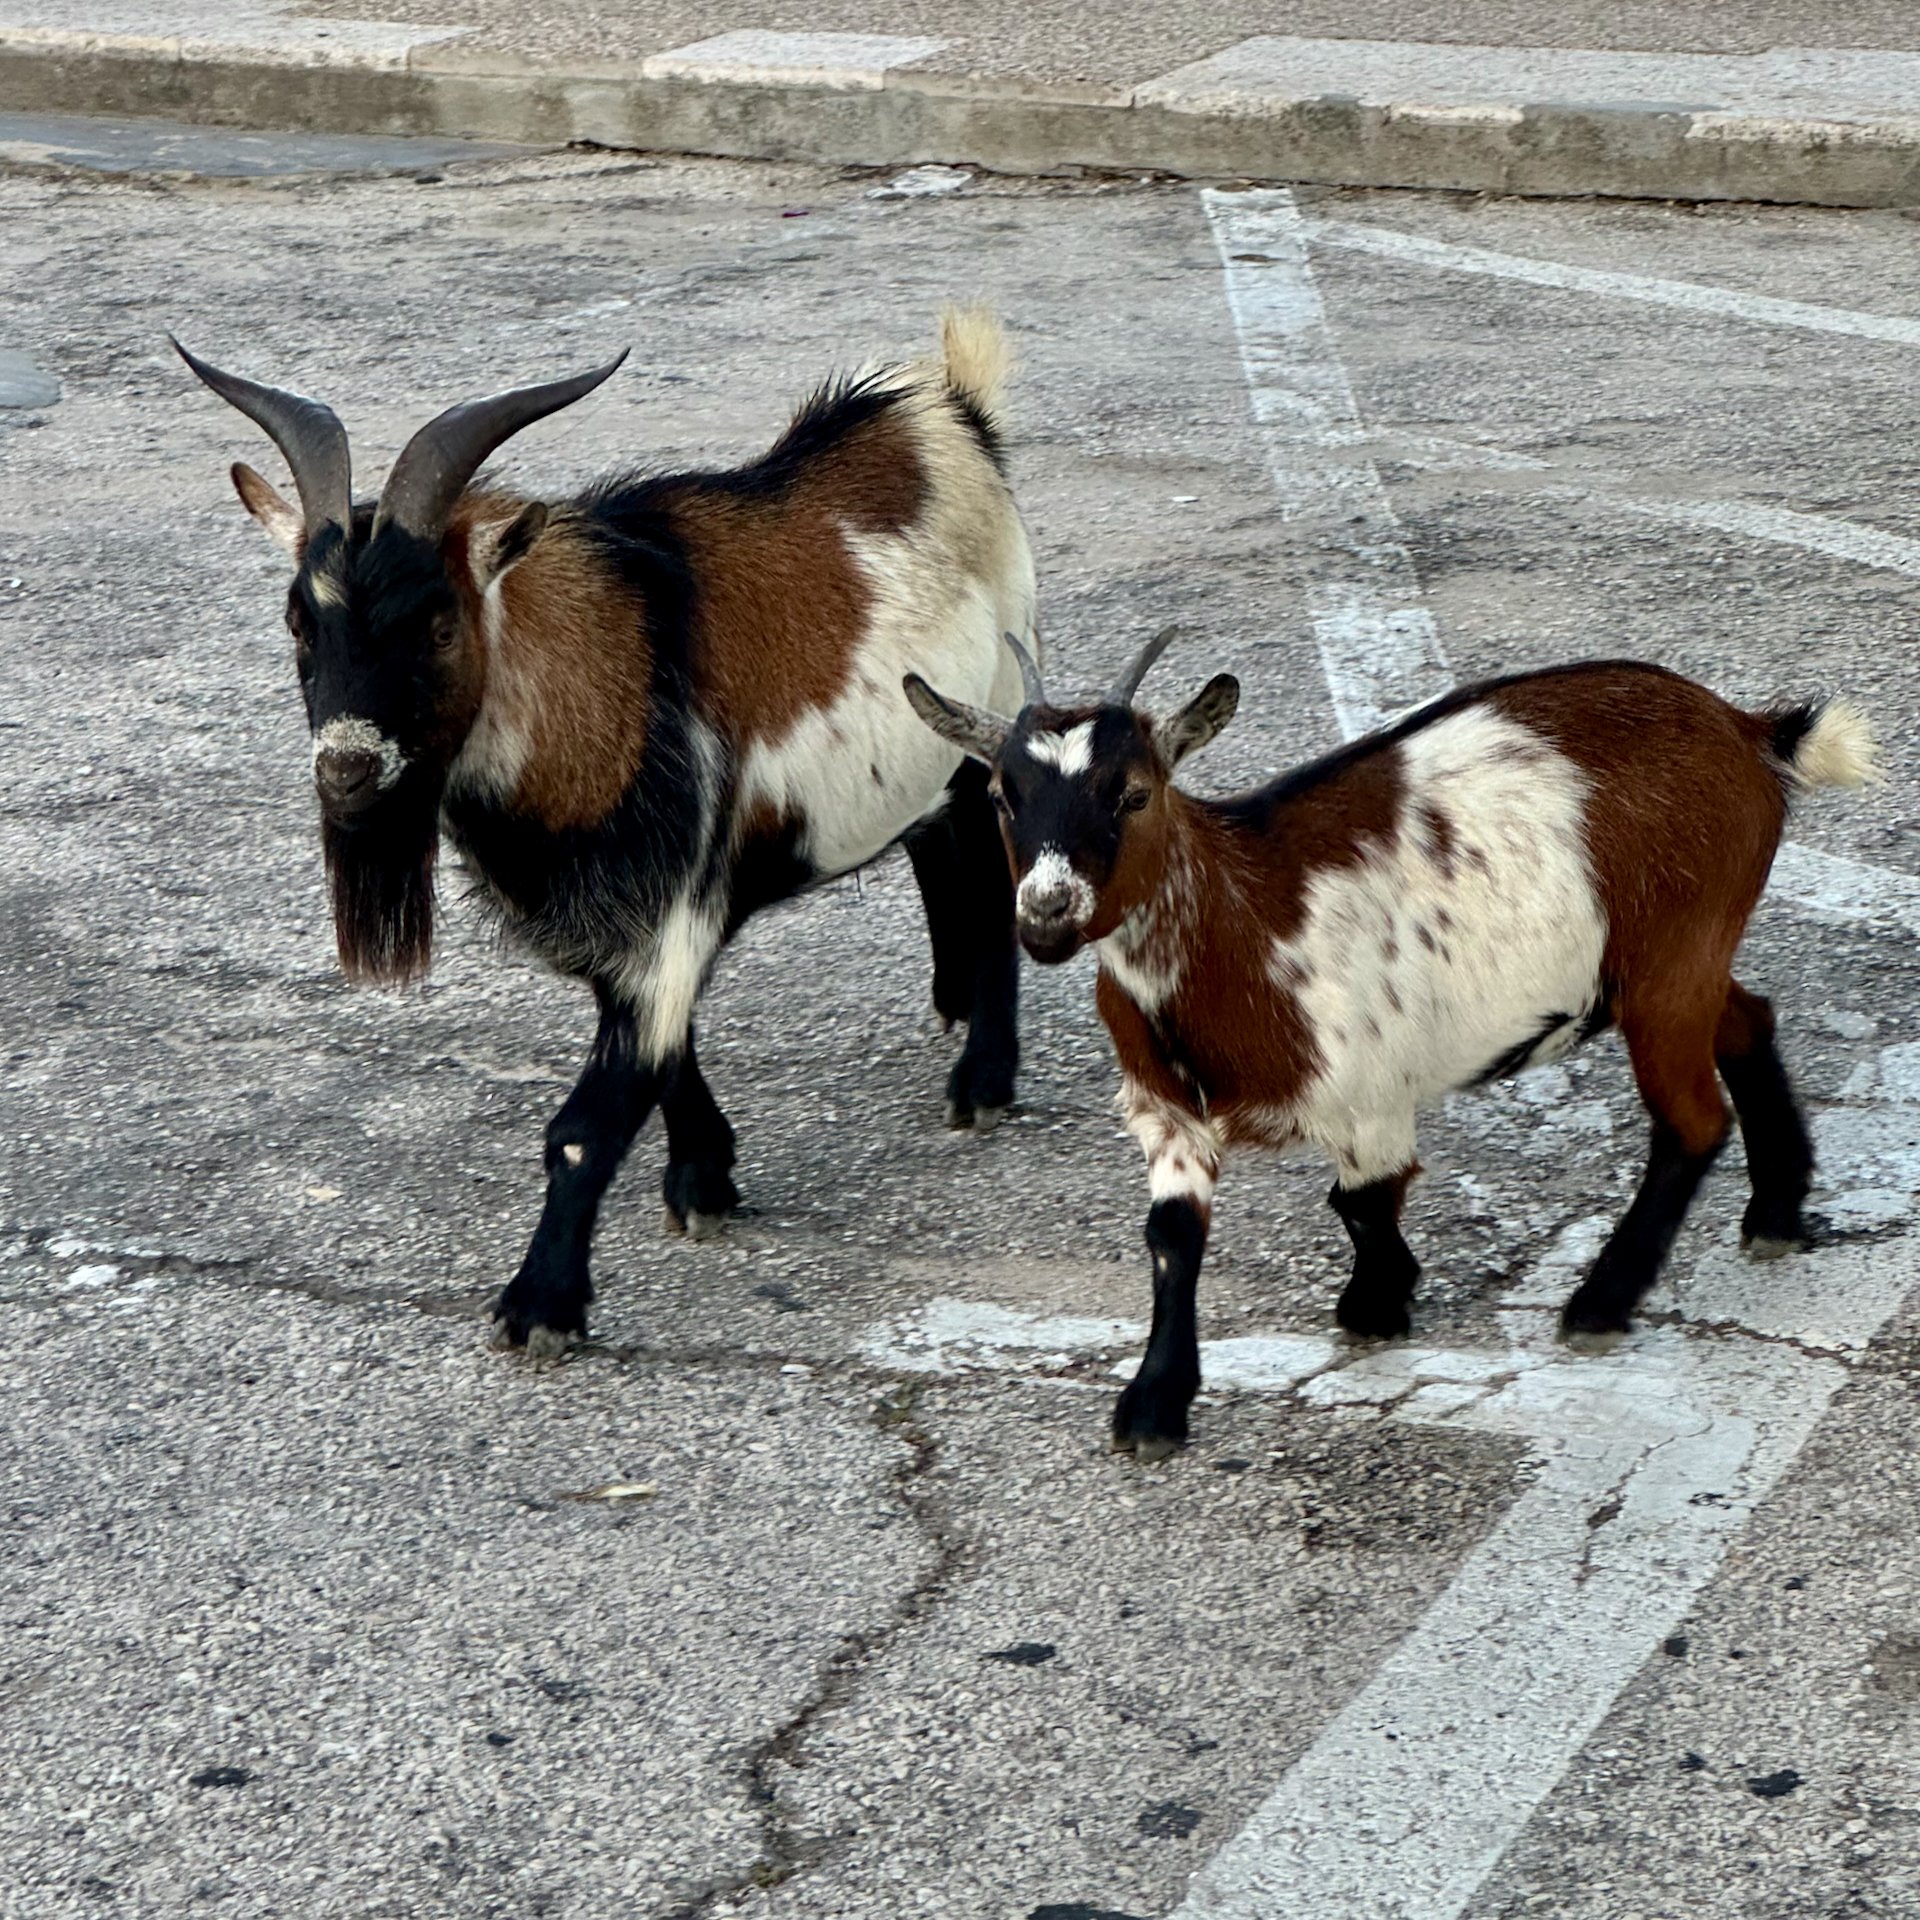  I think moma goat and her little one - there was some drame when they needed to cross the road and the little one was clearly not sure how to do it.  